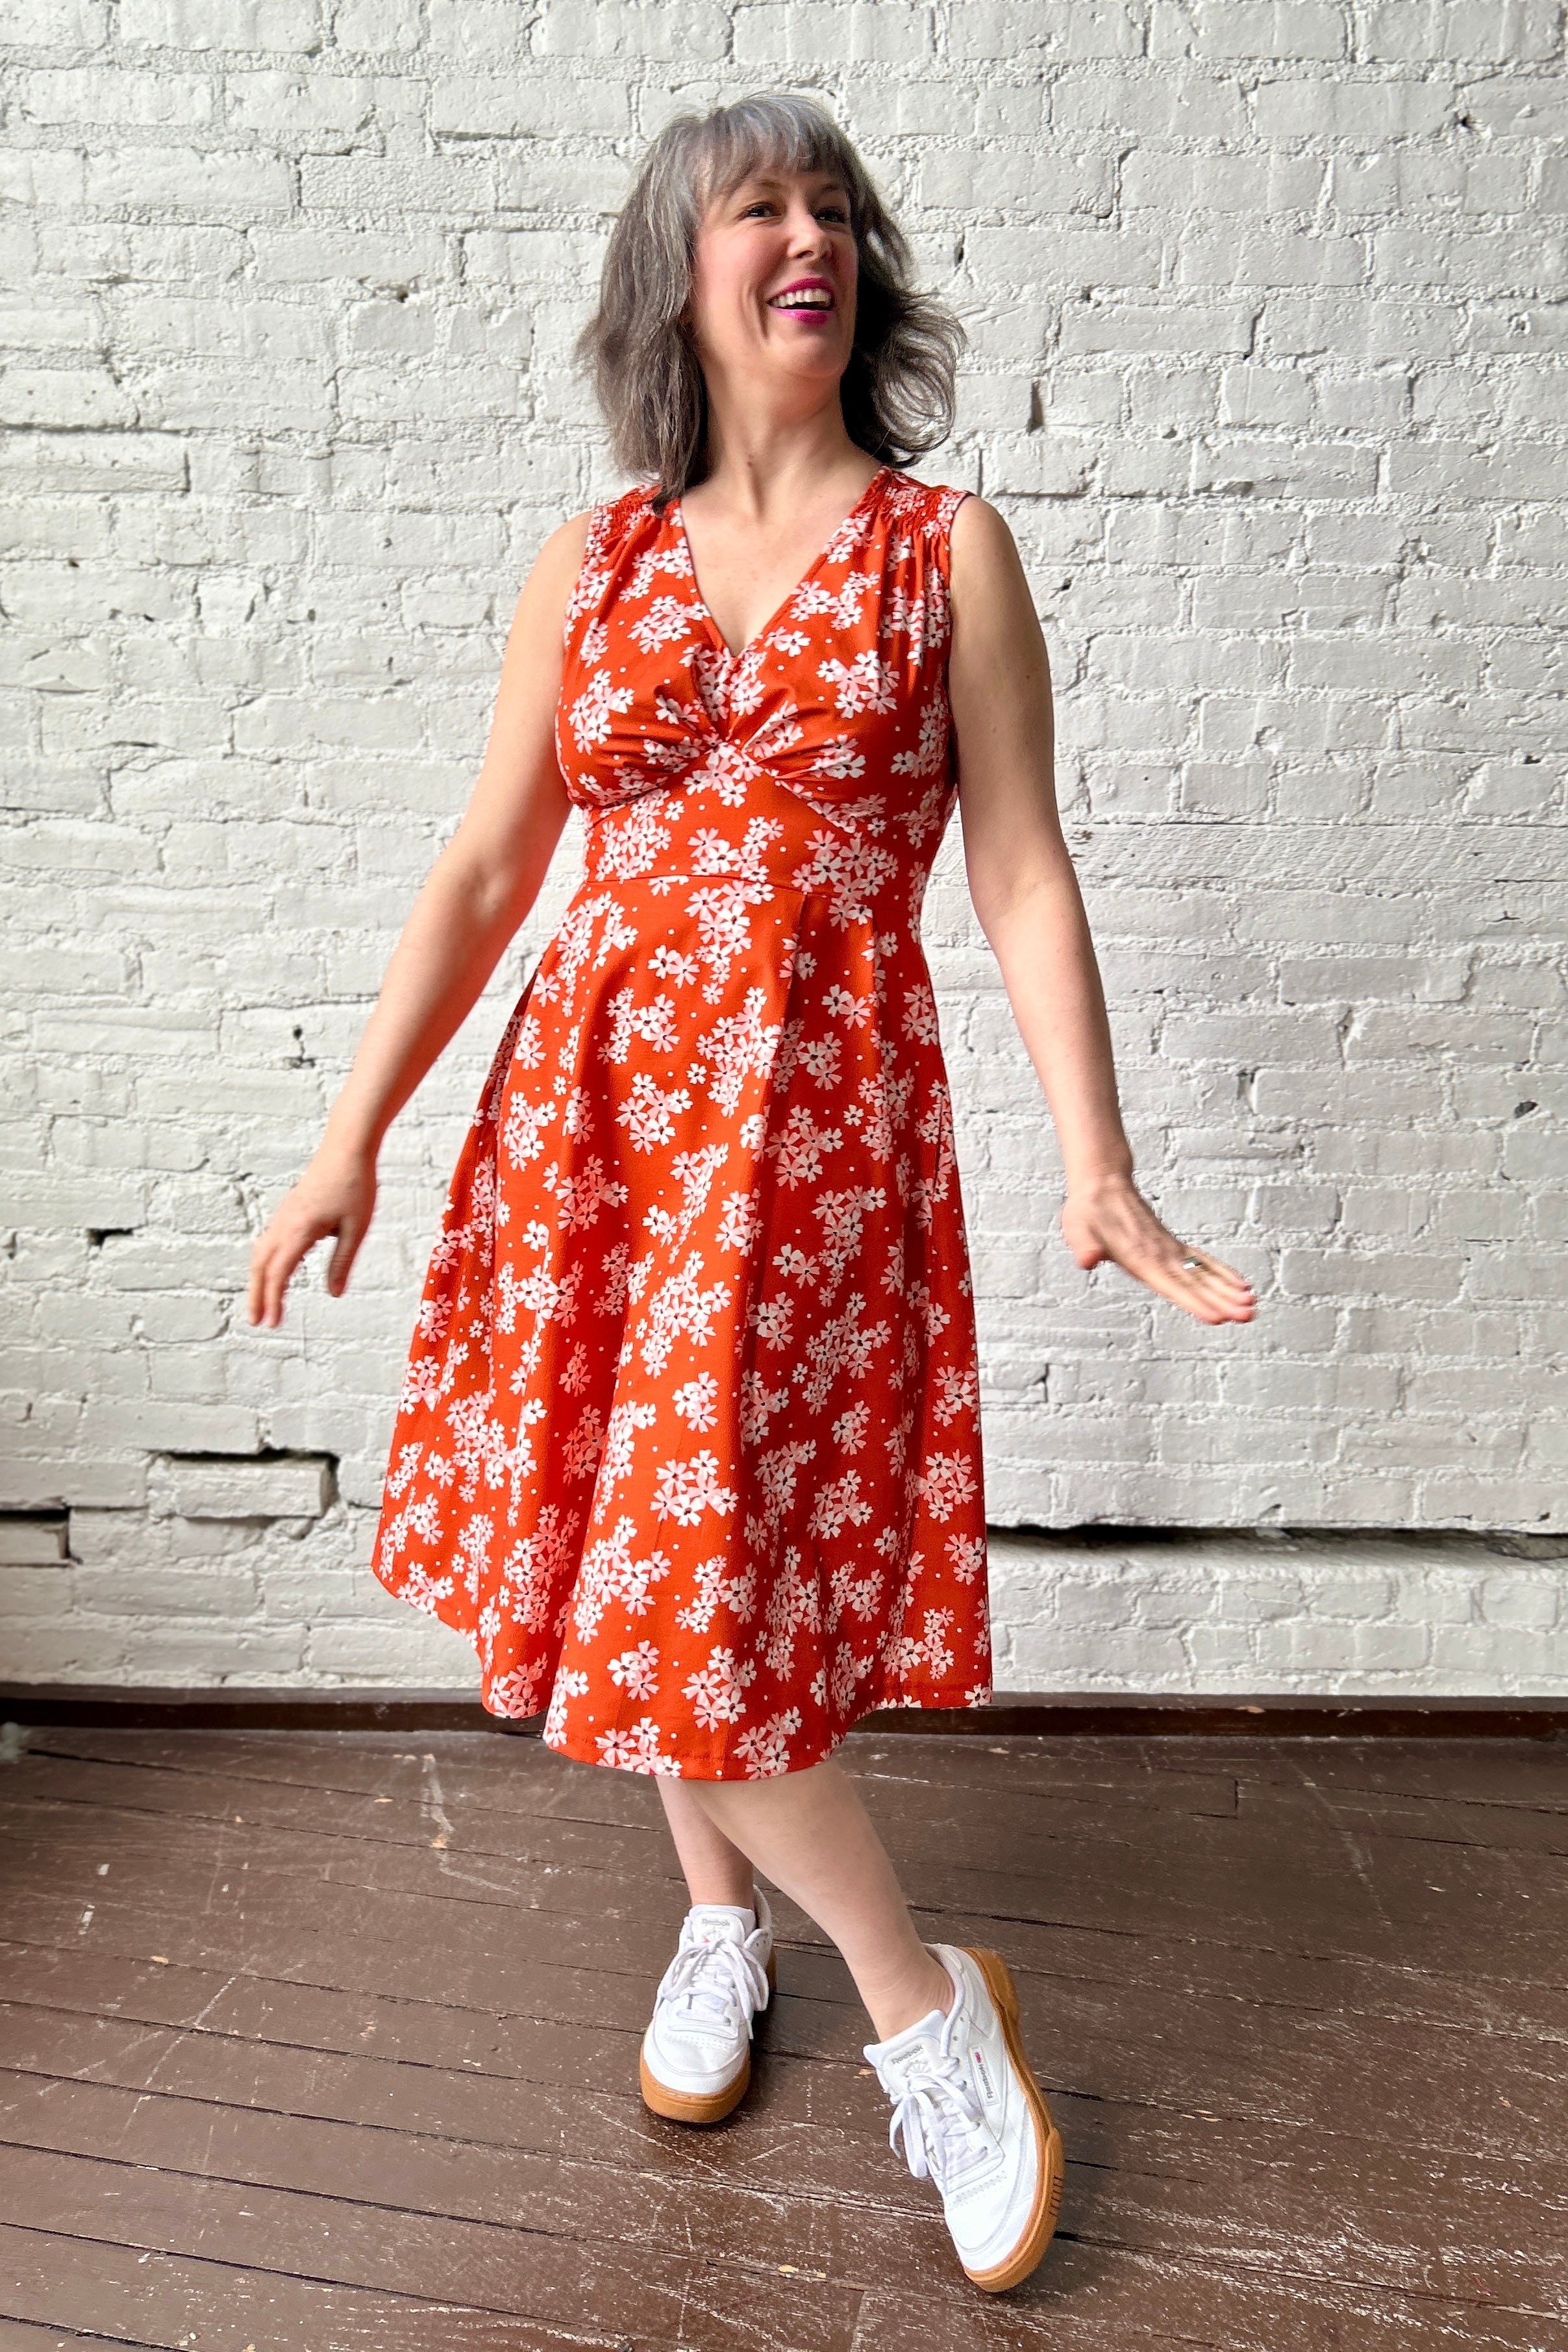 person models an orange sundress with print of white and pink small flowers. Dress has flared skirt, gathered shoulders and bust, fitted waist band.